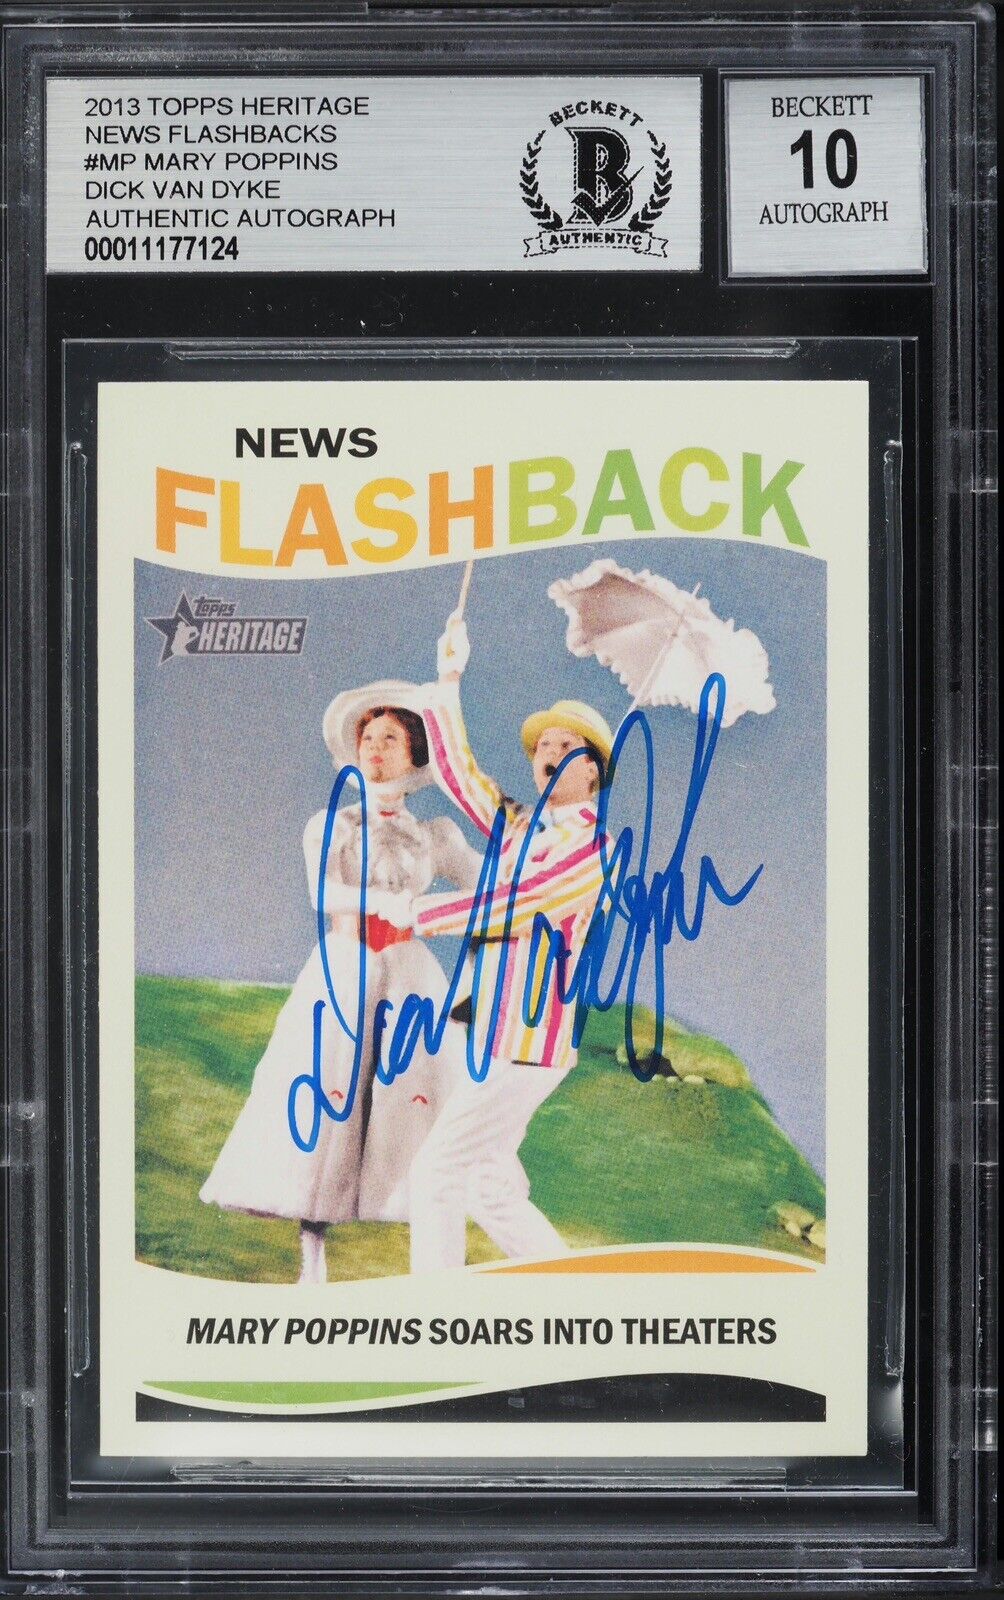 Dick Van Dyke Signed 2013 Topps Heritage Mary Poppins Flashback Card (BAS)